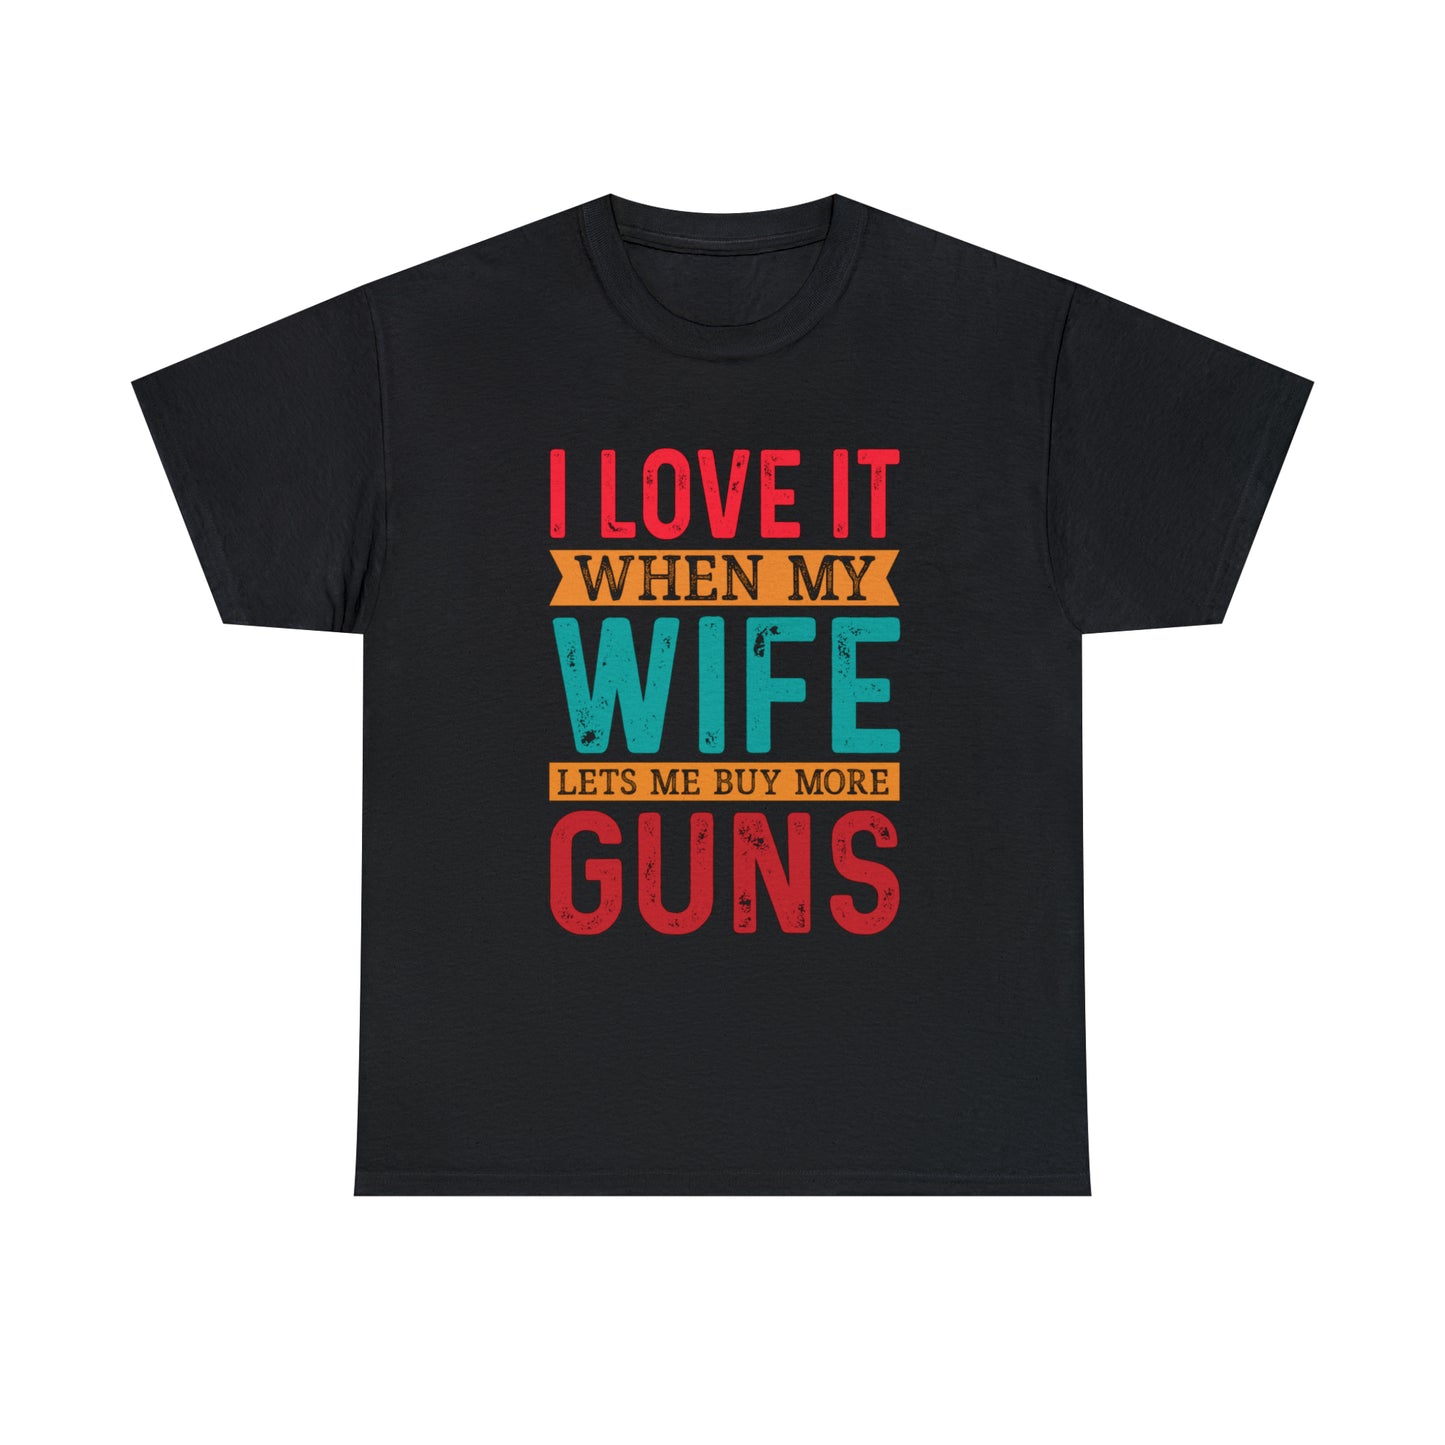 "I Love It When My Wife Lets Me Buy More Guns" T-Shirt - Weave Got Gifts - Unique Gifts You Won’t Find Anywhere Else!